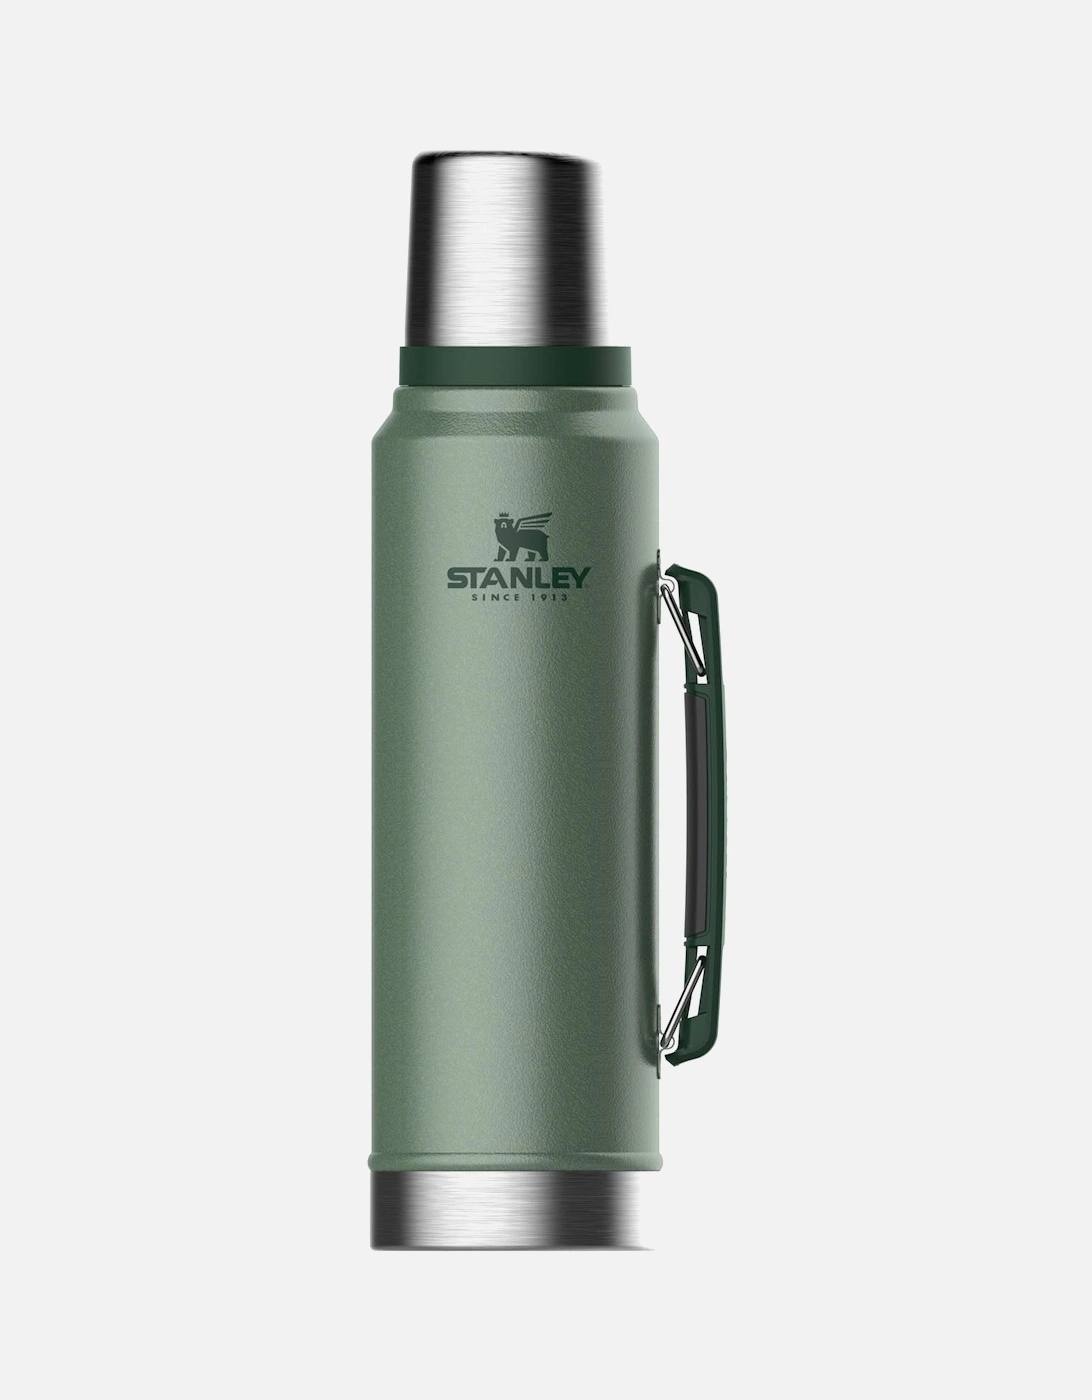 1L Classic Legendary Thermal Cold Water Bottle, 39 of 38